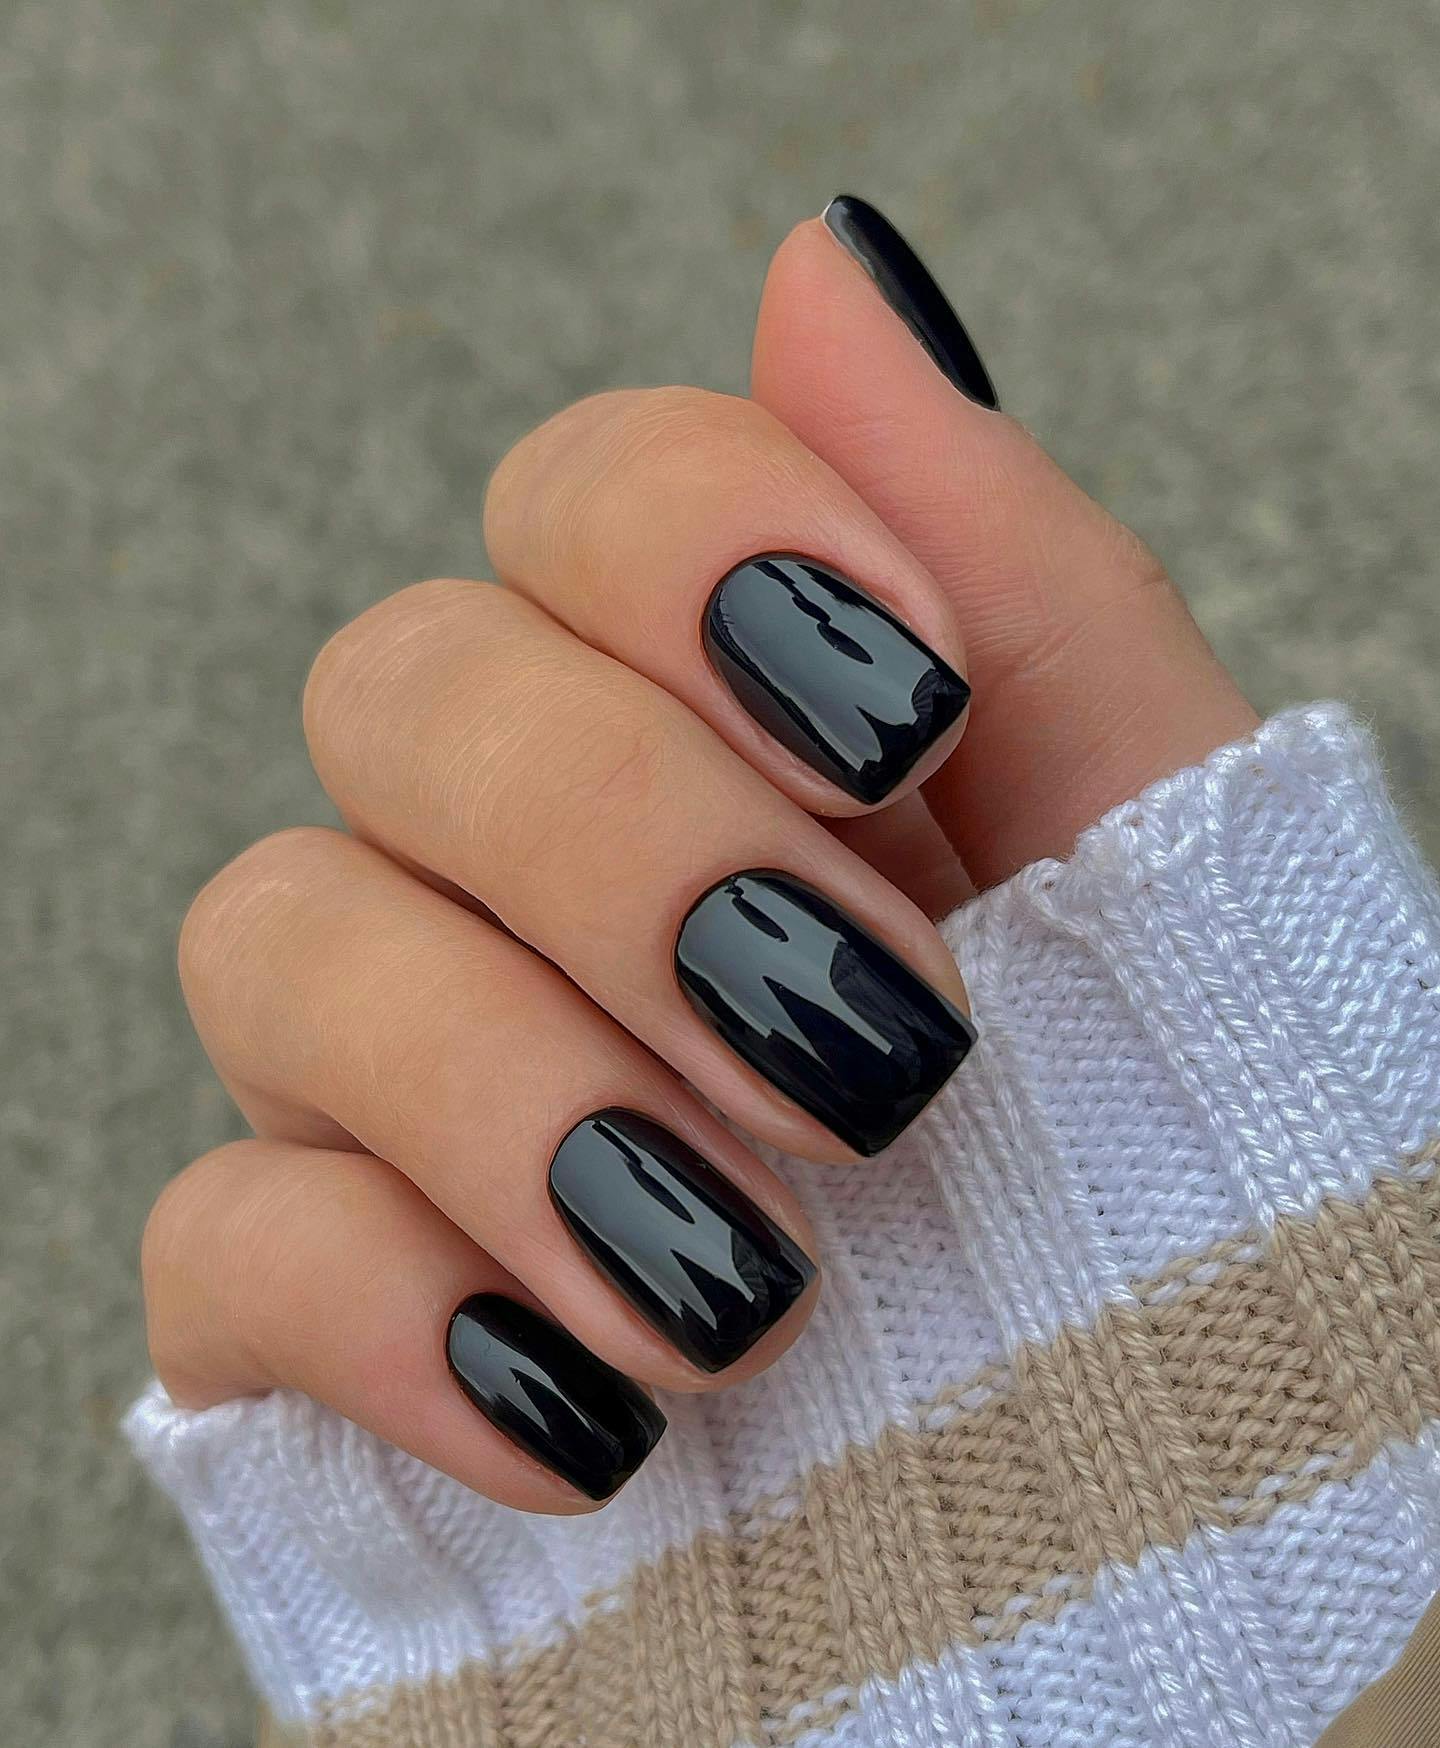 The Latest and Greatest Nail Trends for 2023 | Trendy Nail Bar-Fort Mill |  Top rated nail salon Fort Mill, SC 29708